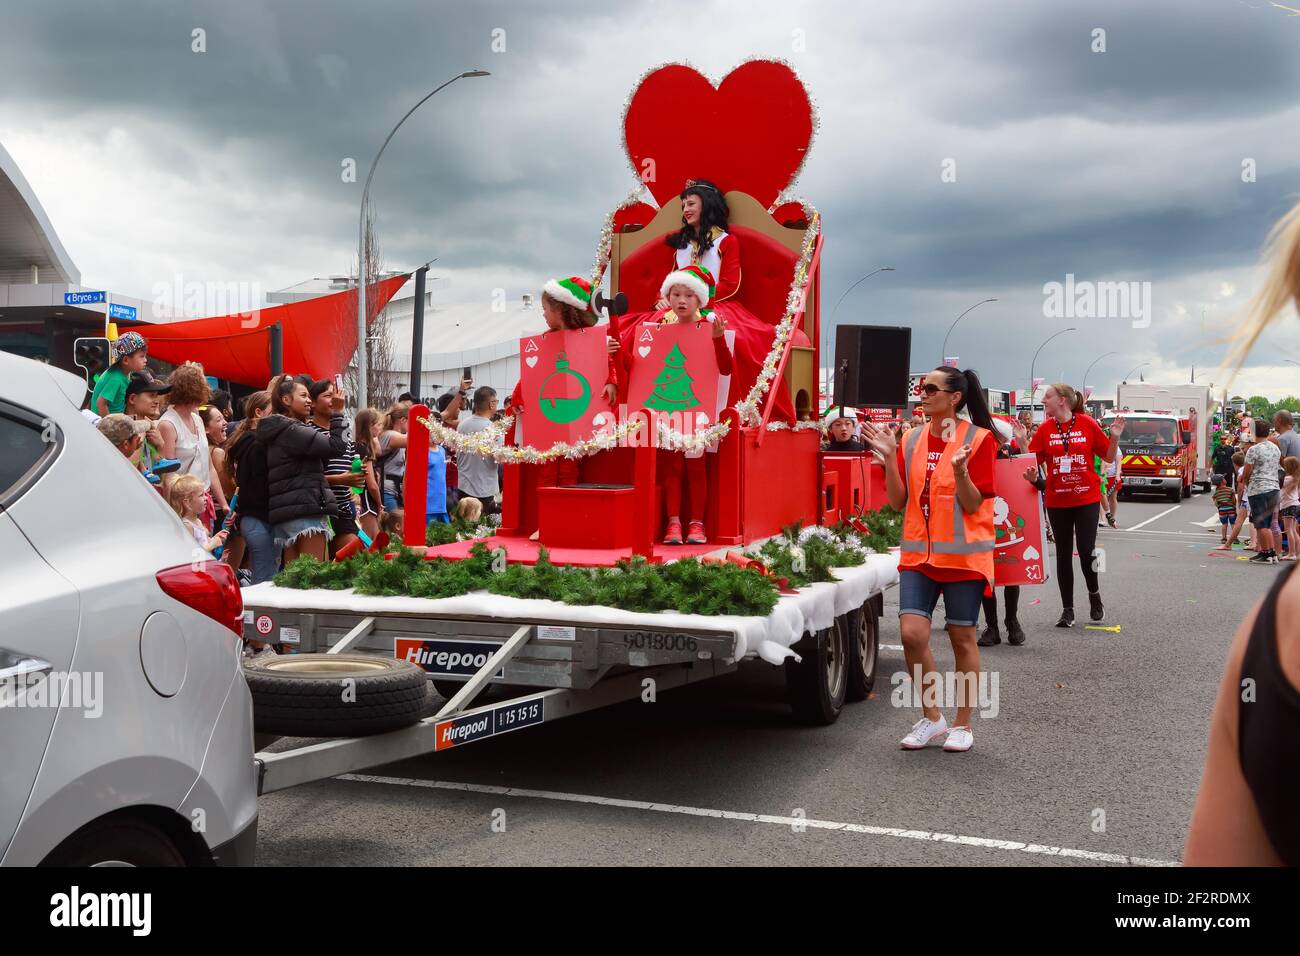 A woman dressed as the Queen of Hearts at a Christmas parade, with children dressed as playing cards, all riding on a parade float Stock Photo